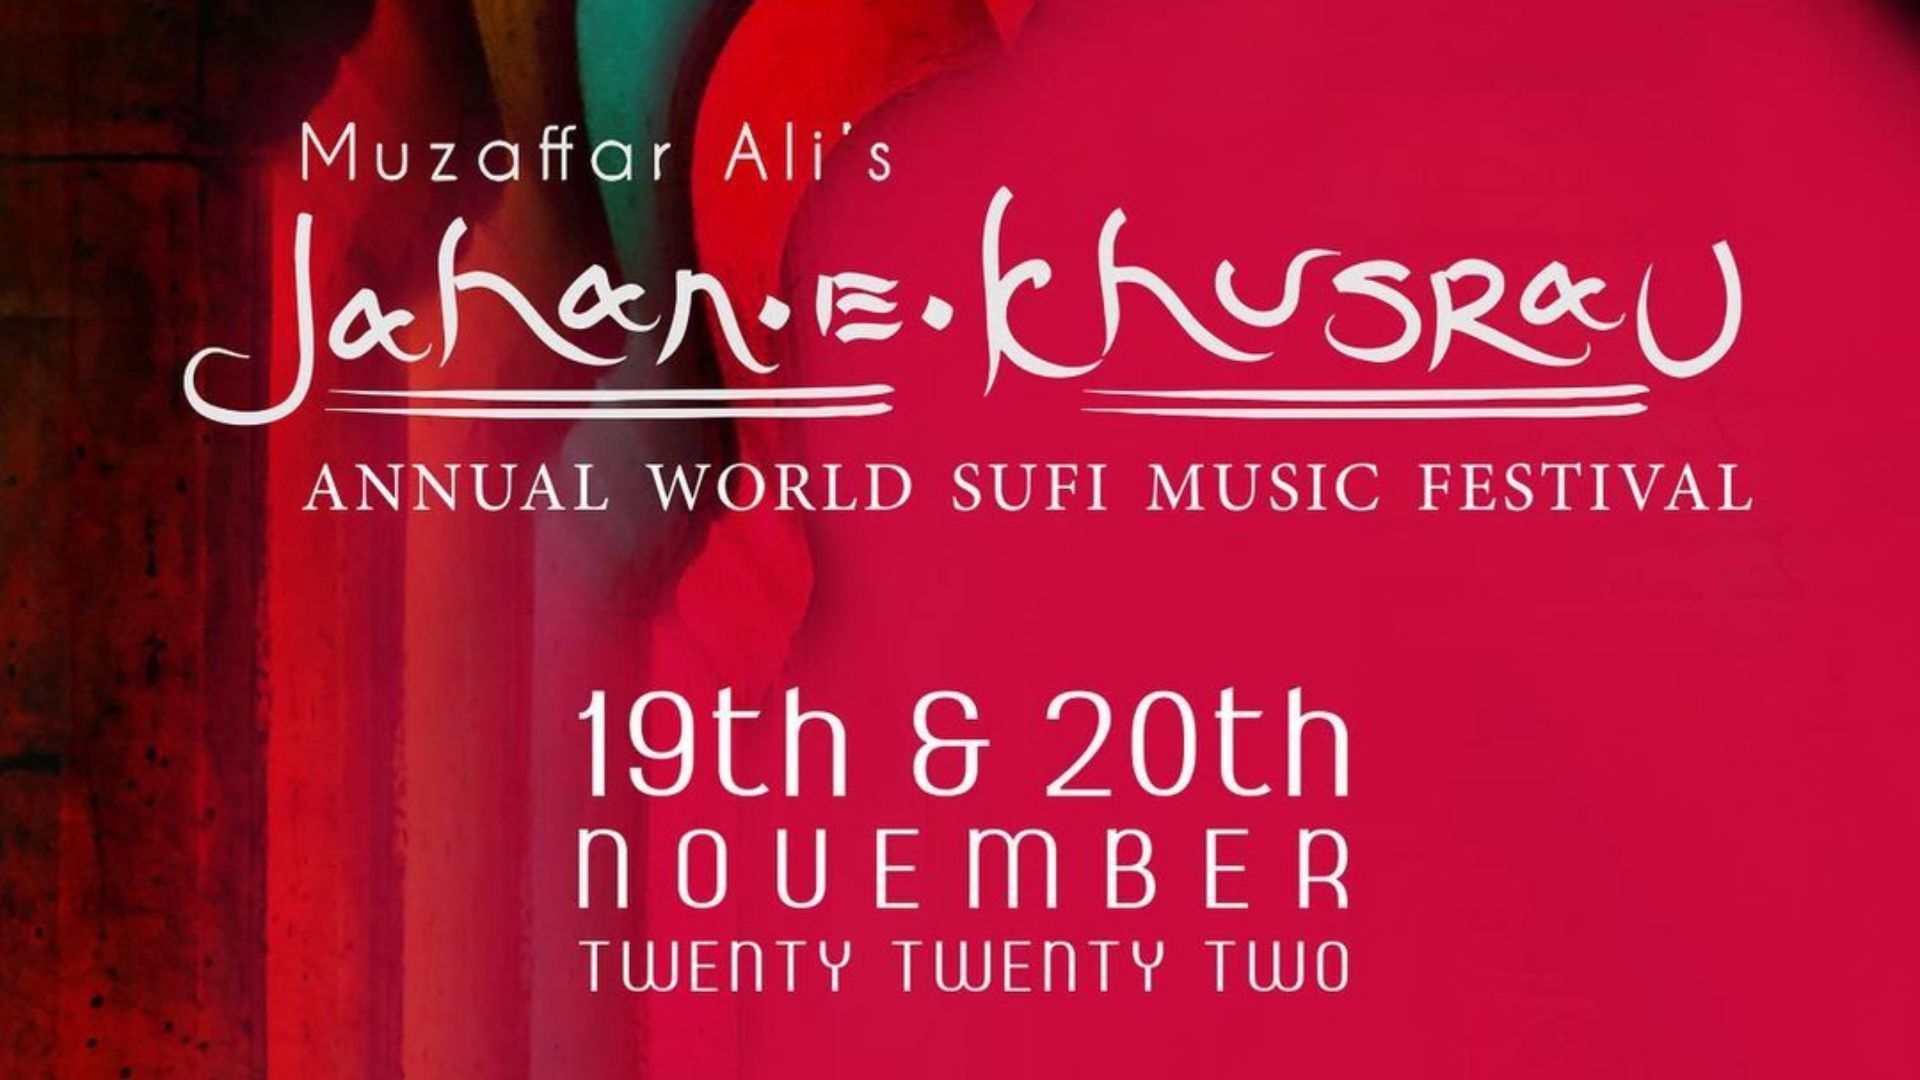 What To Expect At Jahan-E-Khusrau, A Sufi Music & Arts Festival, In Jaipur